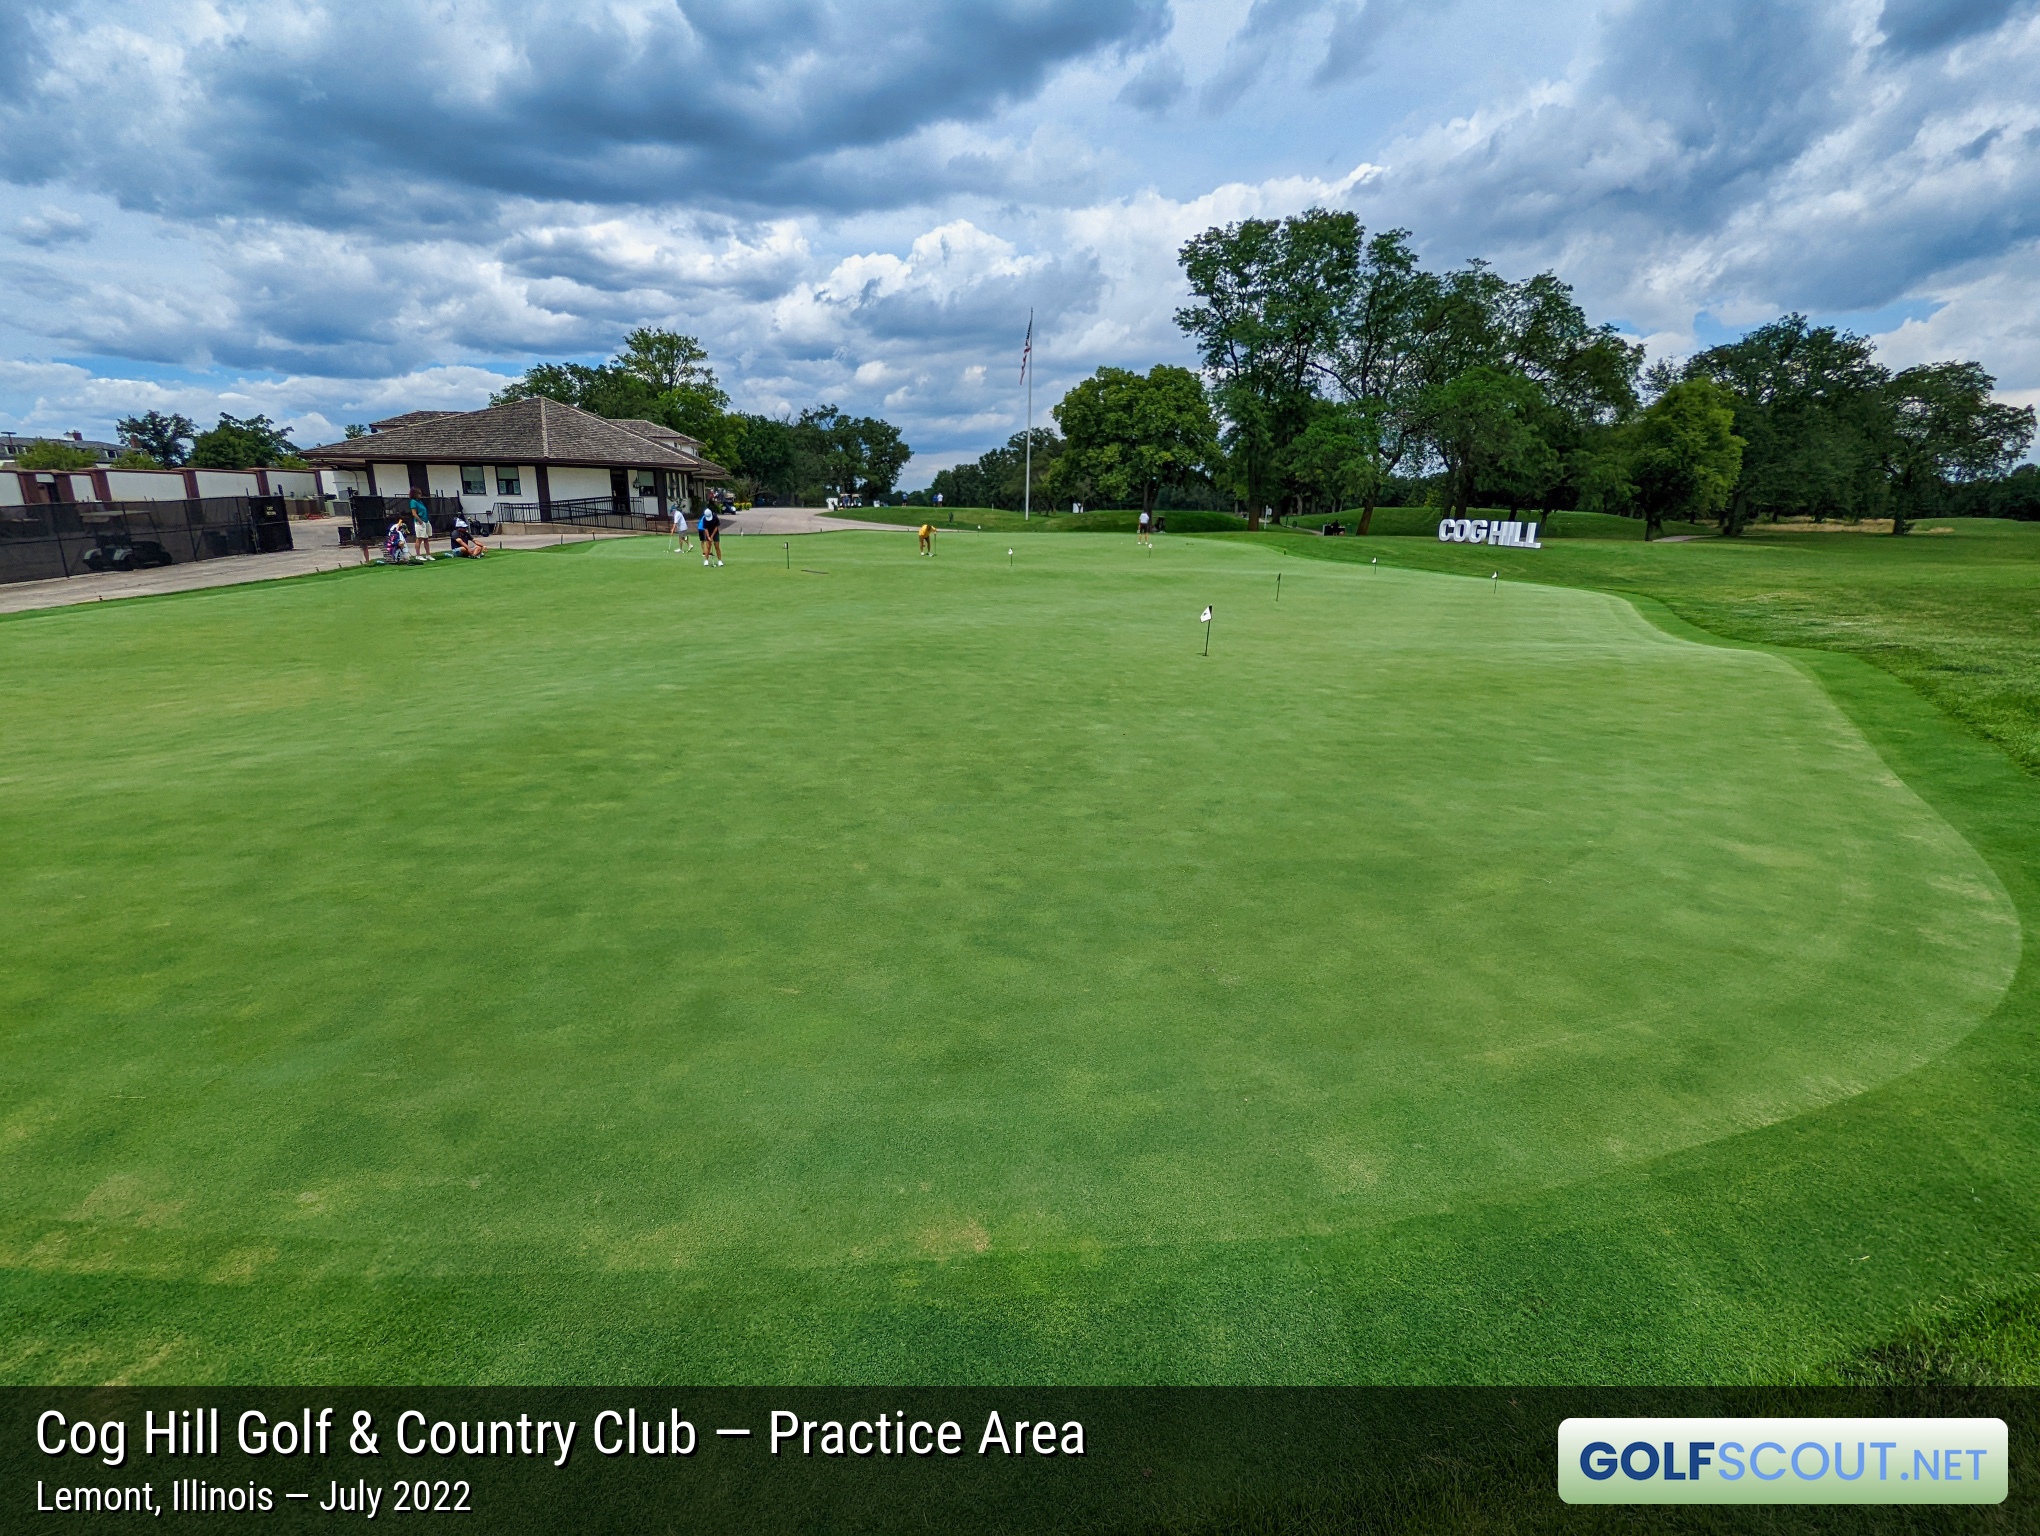 Photo of the practice area at Cog Hill Course #2 - Ravines in Lemont, Illinois. This is the enormous putting green dedicated to courses 2 and 4.